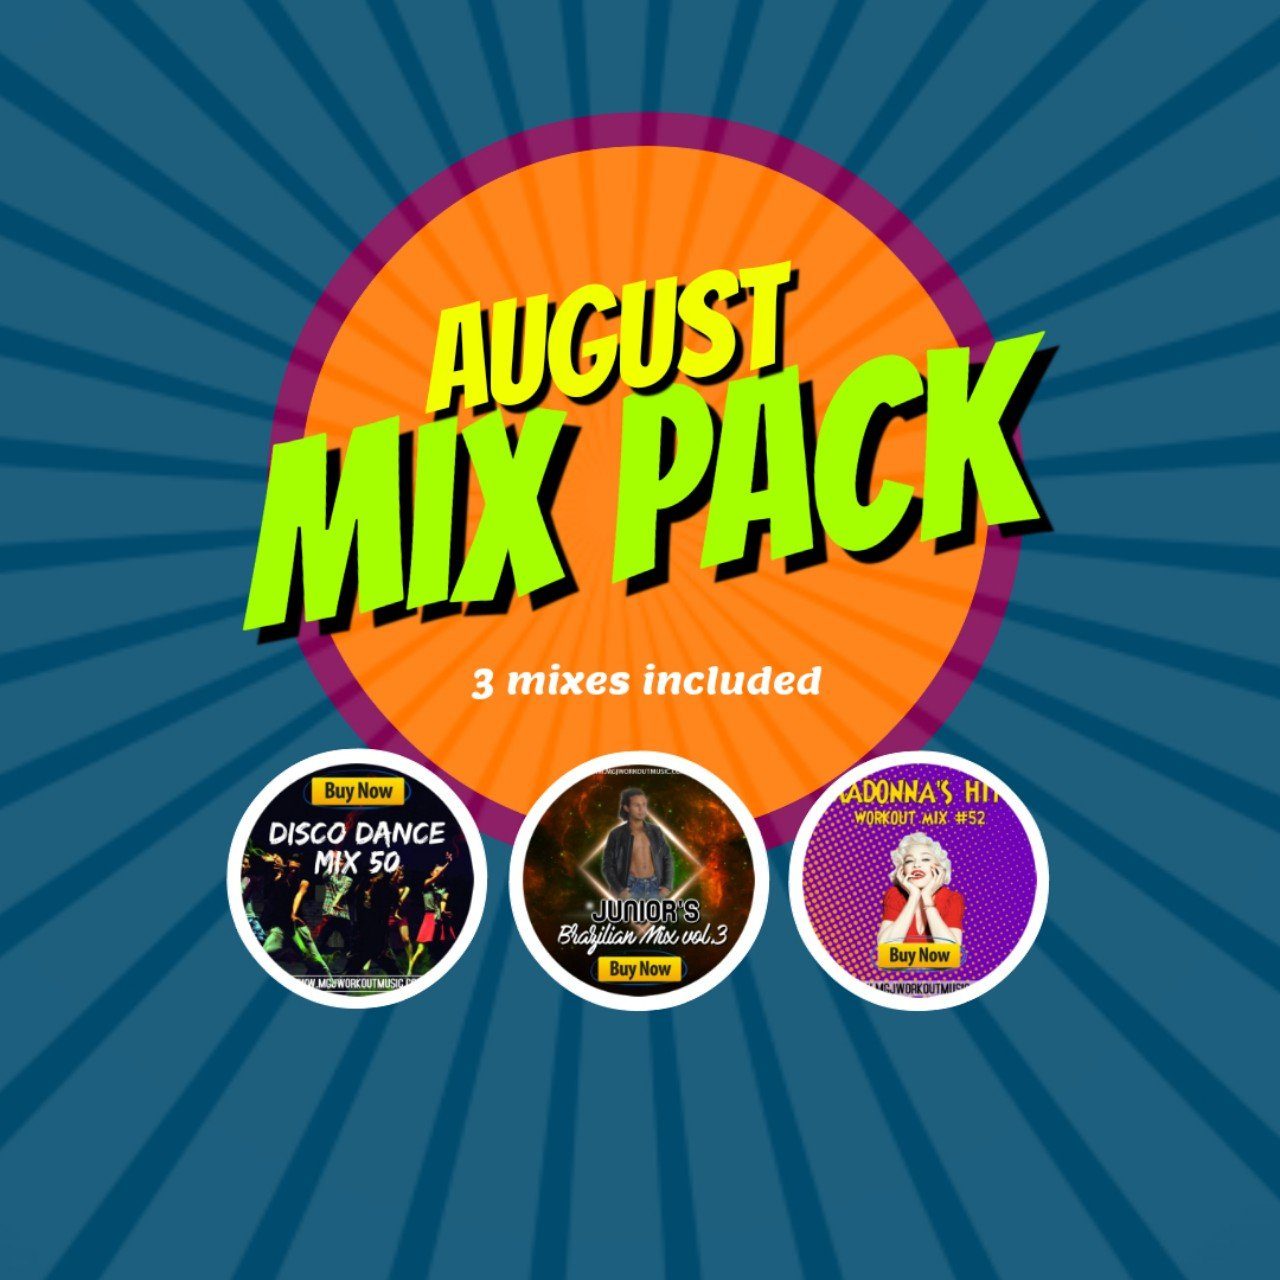 MGJ Workout Music - August Mix Pack 2019